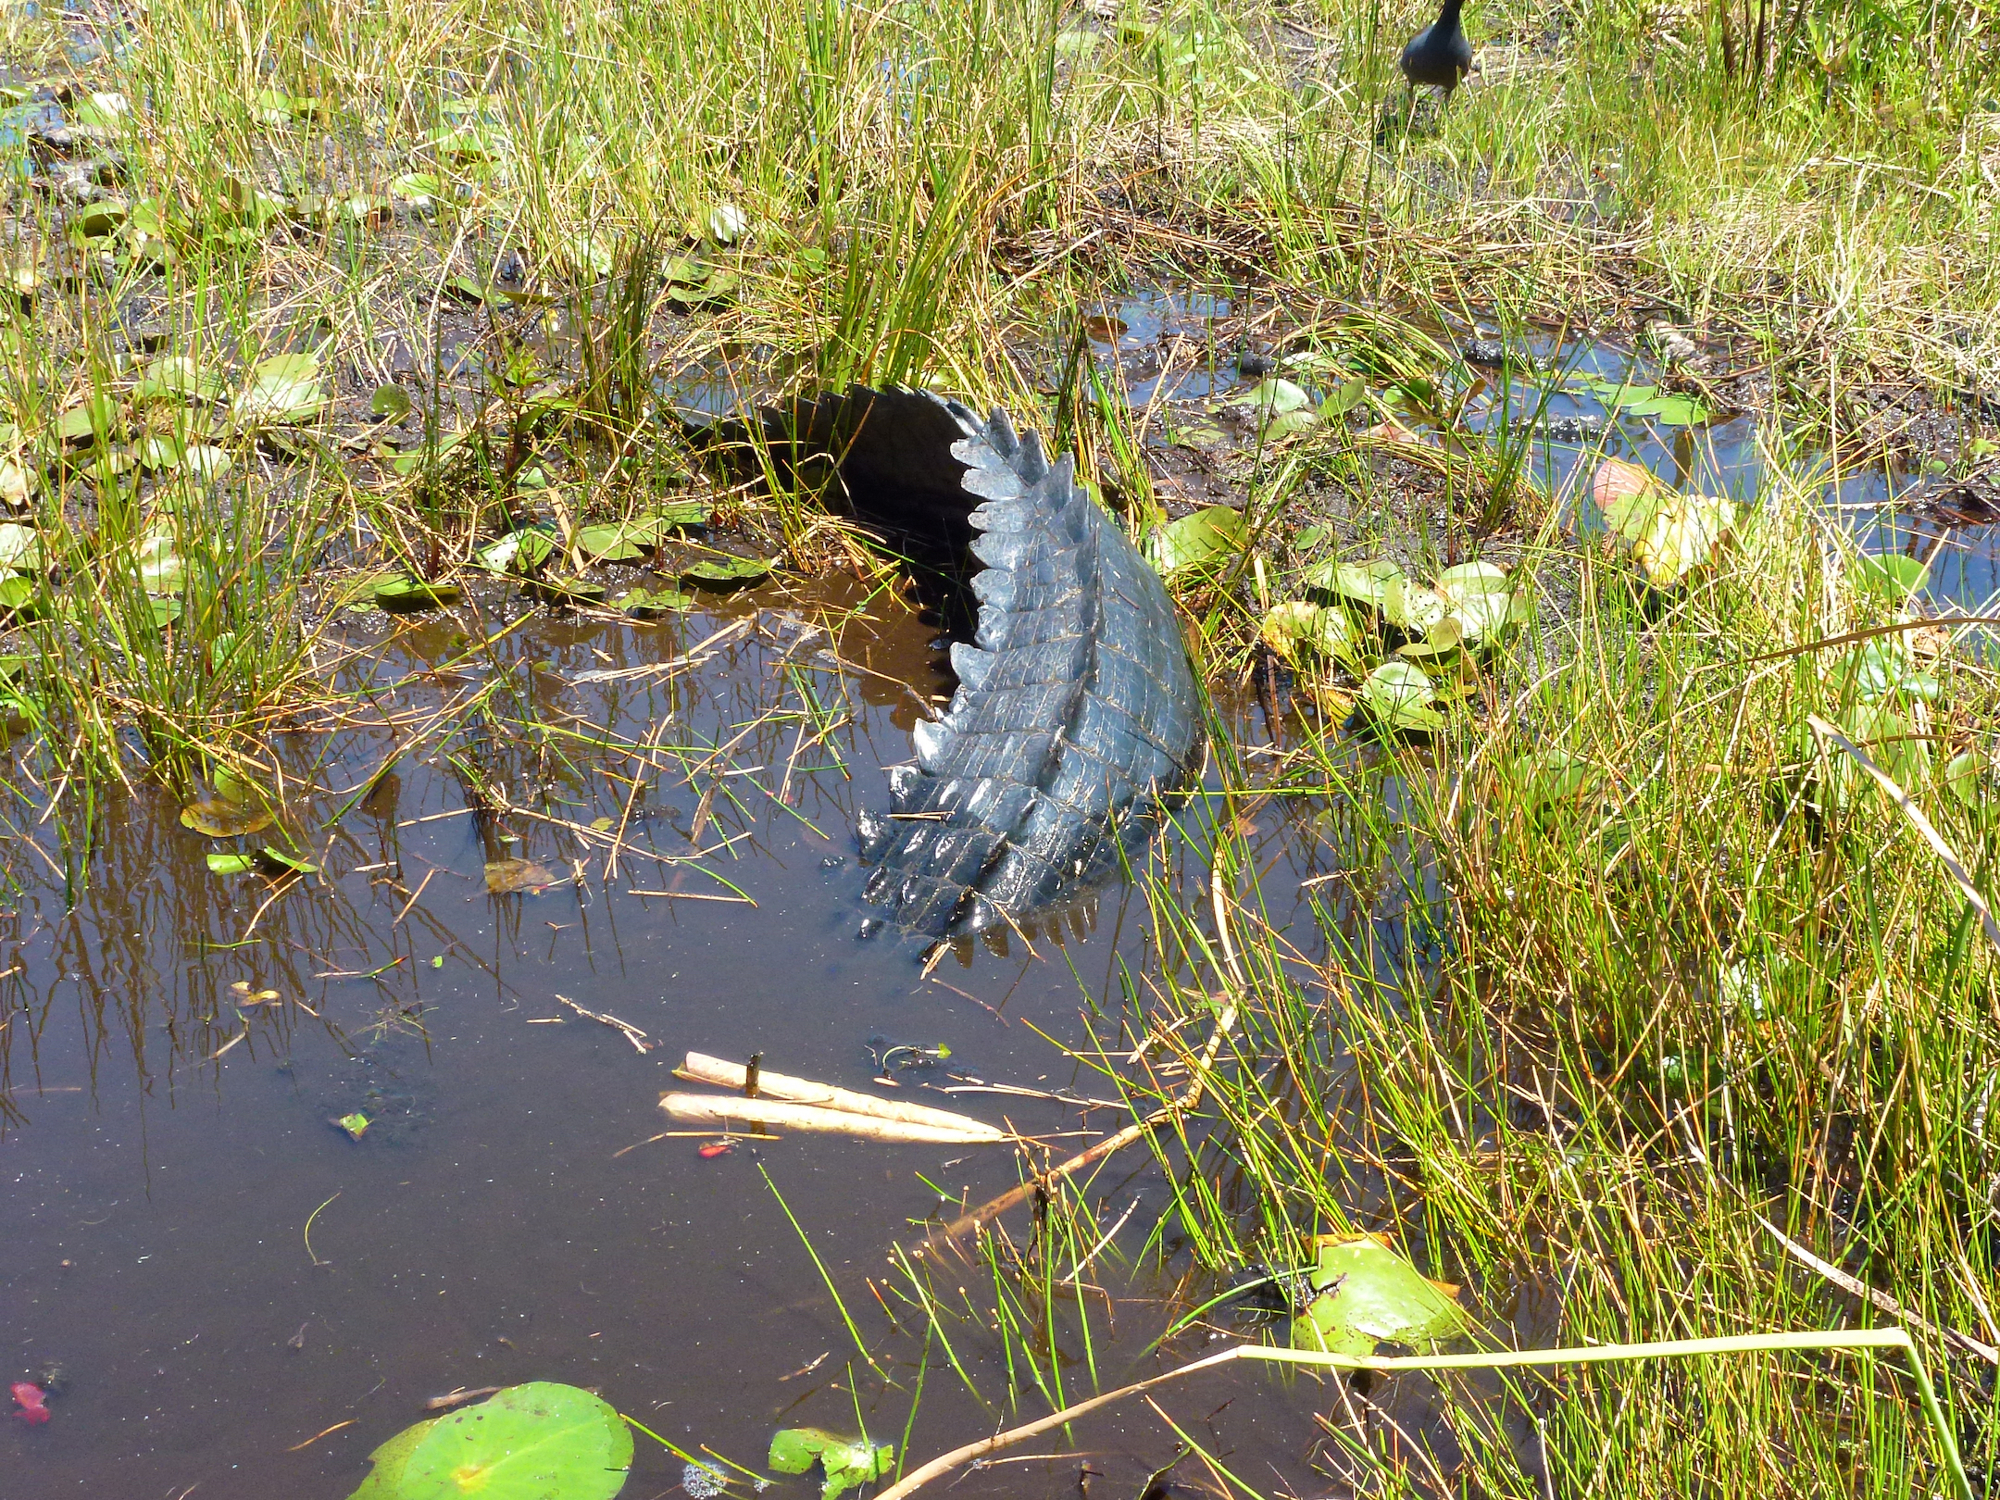 It doesn't take much water to hide a big gator. (Photo by Jonathan Simmons)